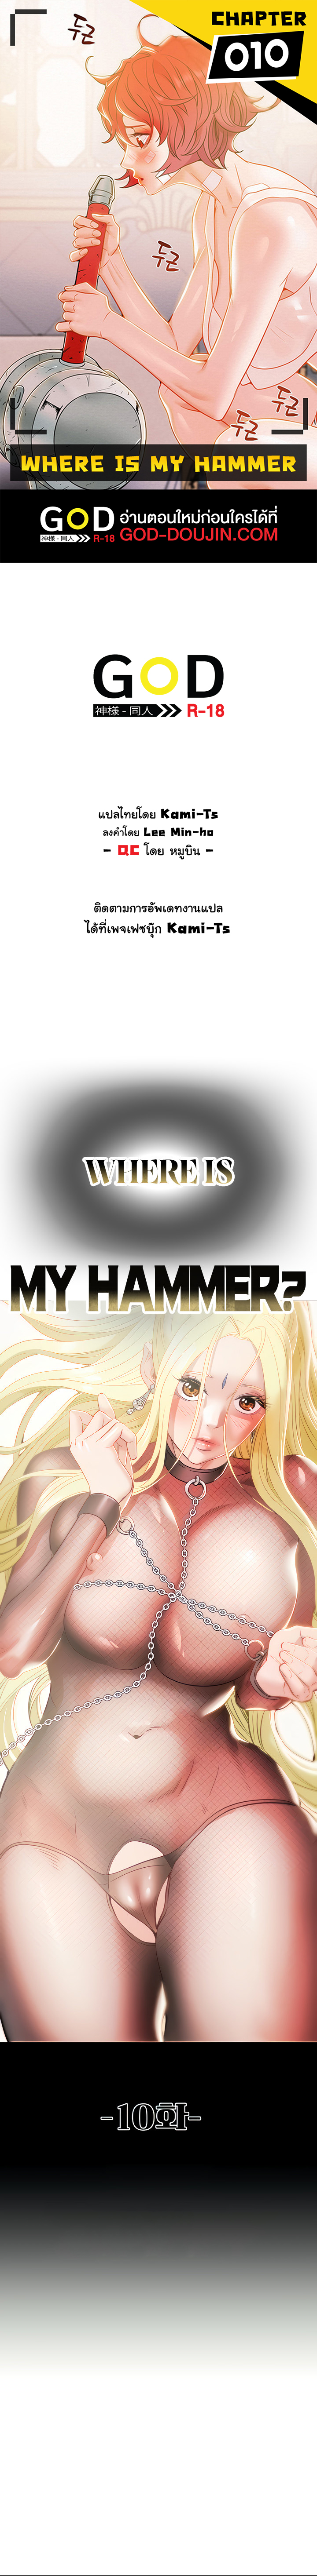 Where is My Hammer 10 01